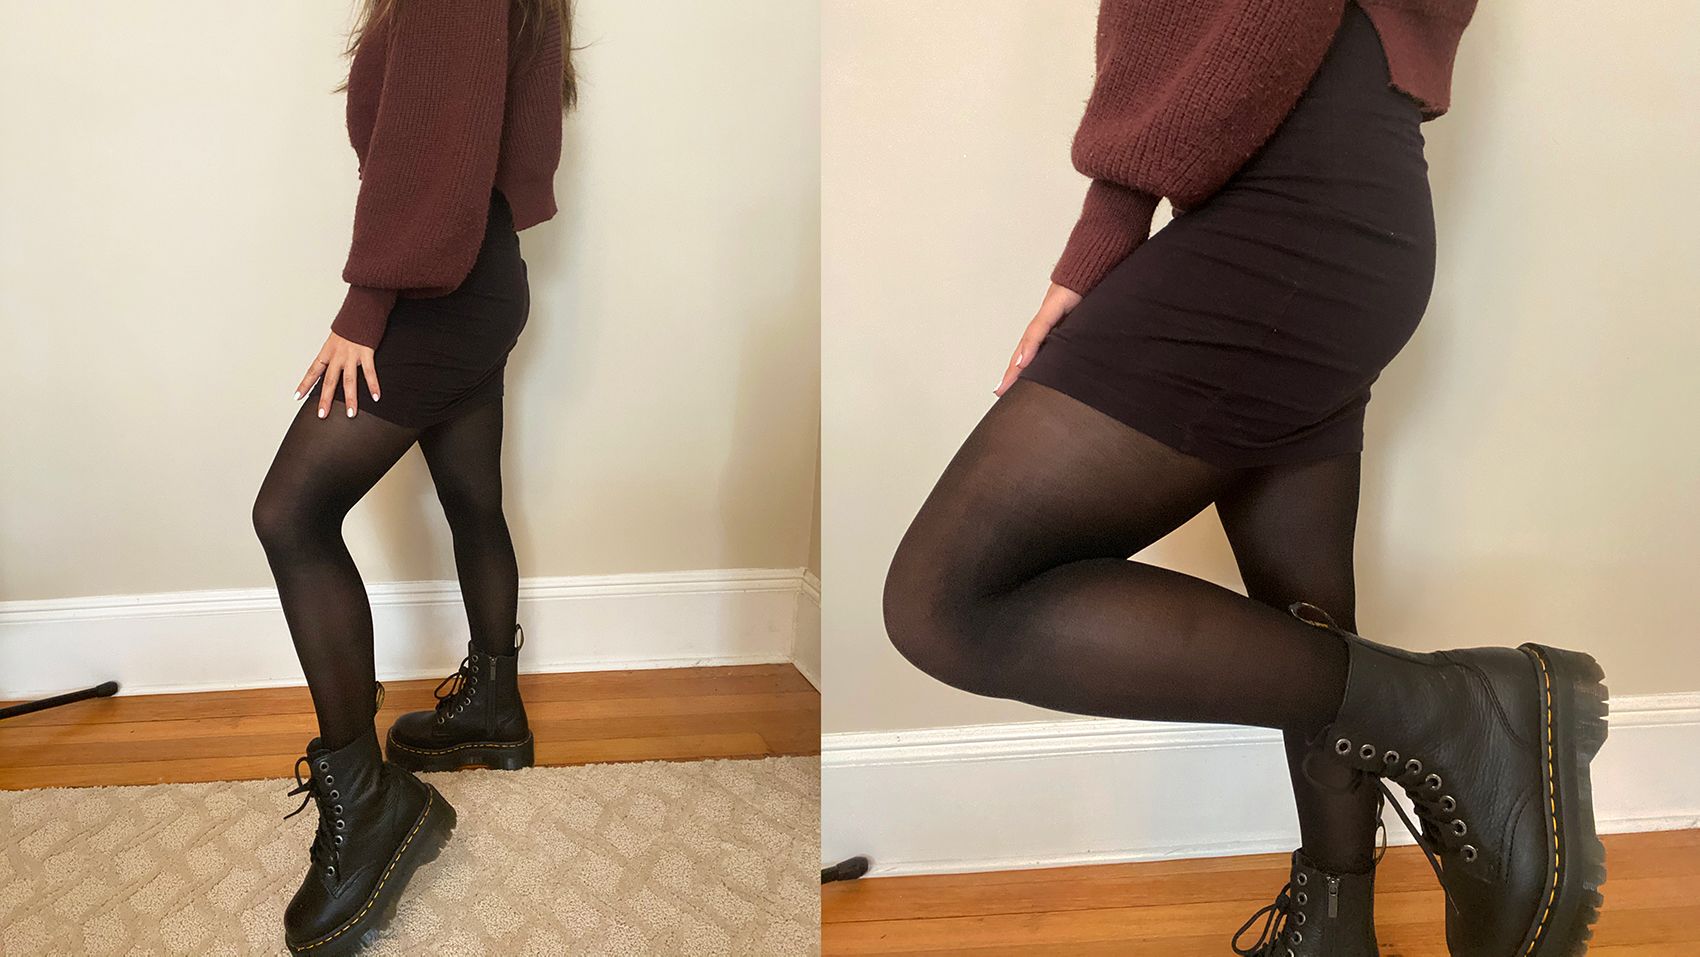 Any other tights recommendations? #sheertex #review